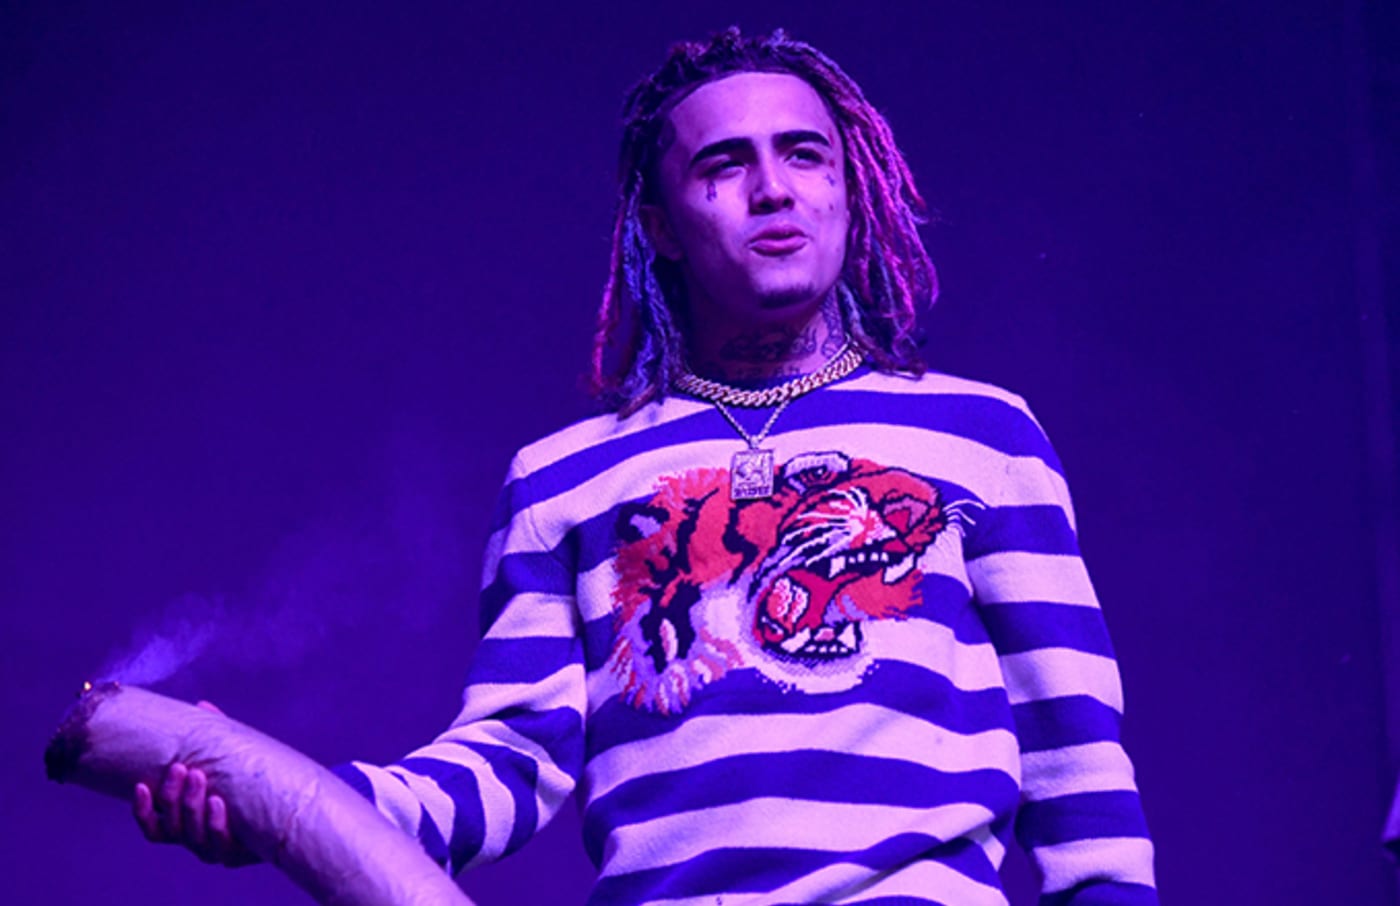 Listen to Lil Pump's “Gucci Gang” Remix with Savage, Mane, Bad Bunny, More | Complex